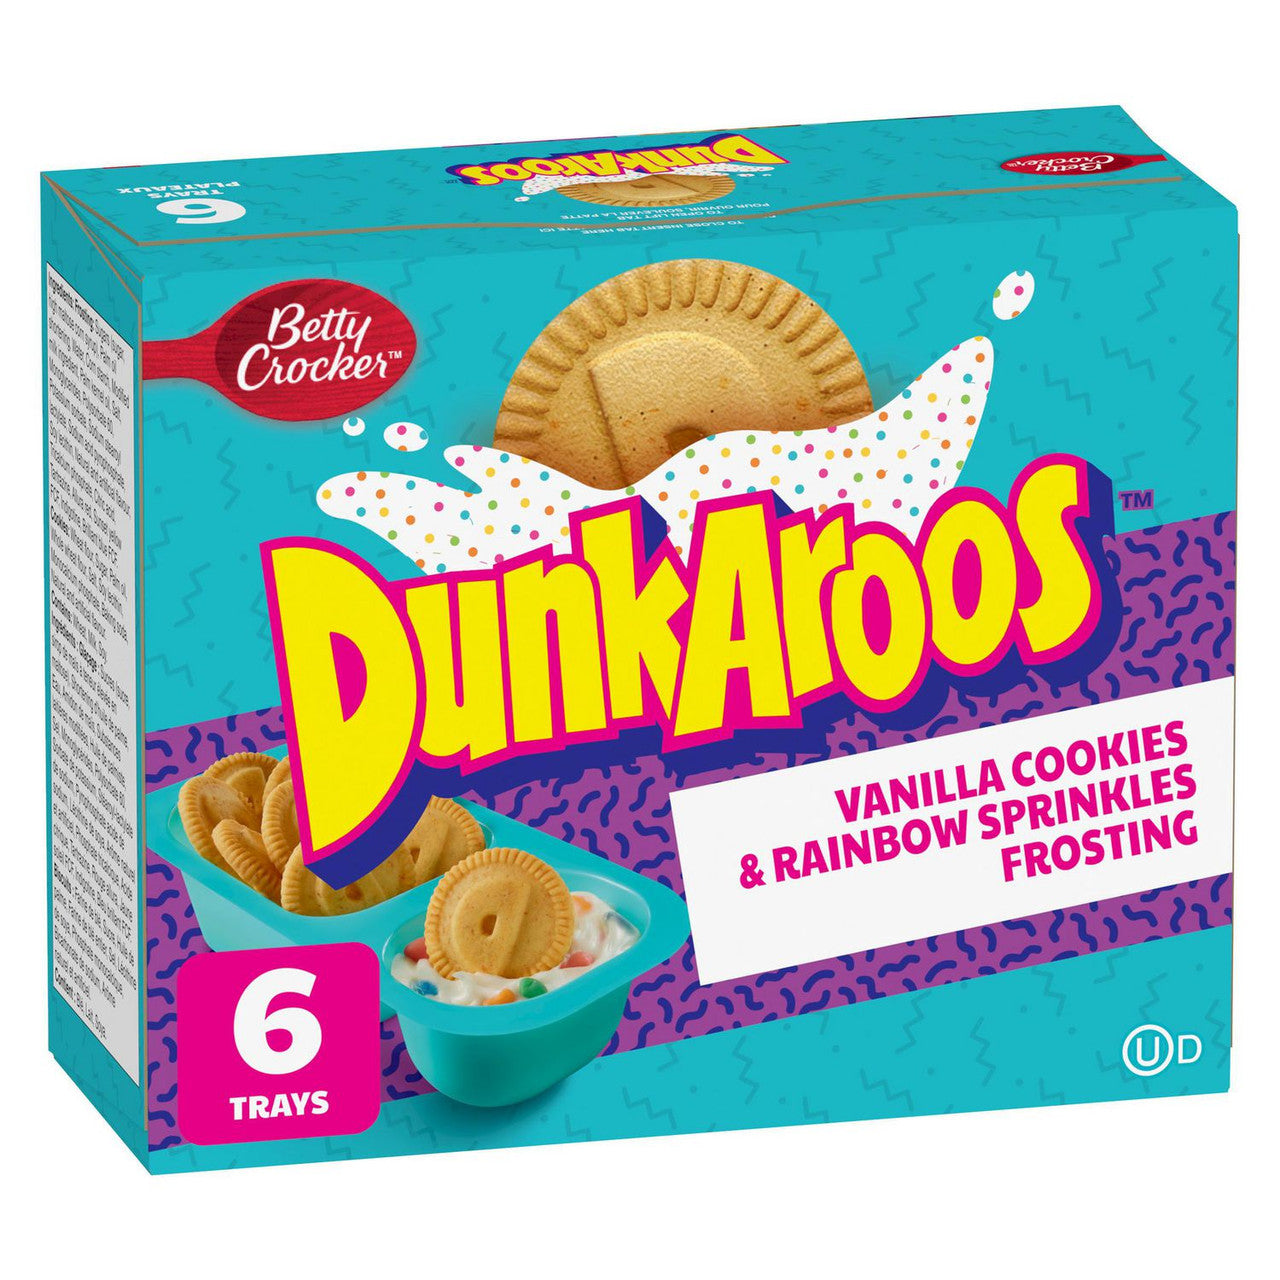 Betty Crocker DunkAroos, Vanilla Cookies with Rainbow Sprinkle Frosting, 6 x 28g/1 oz., Box {Imported from Canada}